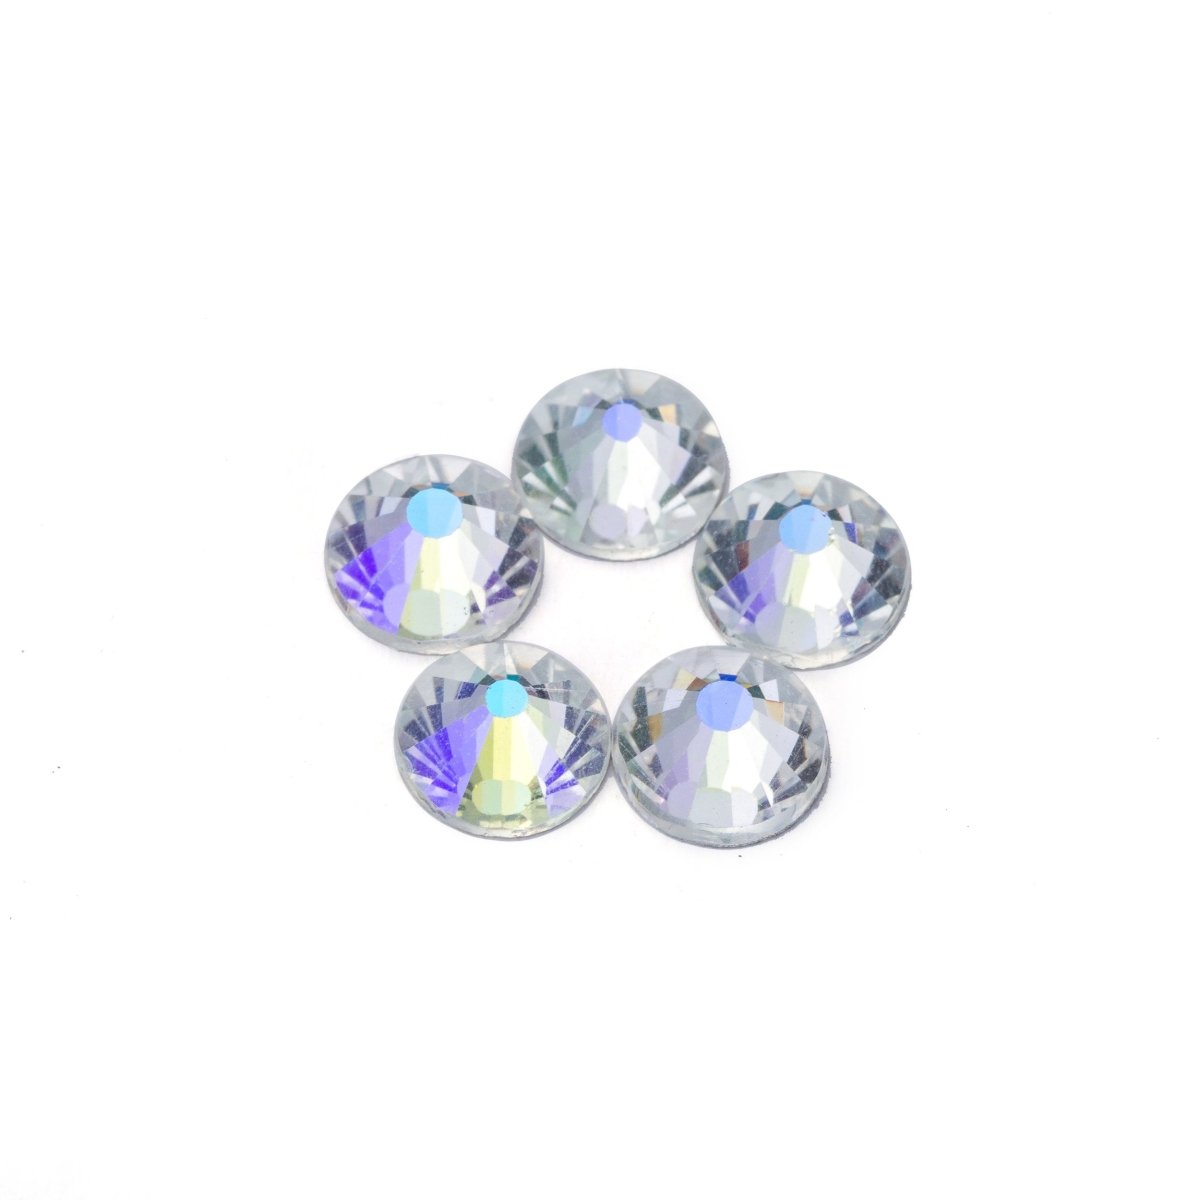 288 pcs High Quality Crystal Clear Moonlight Crystal Rhinestones Loose wholesale Crystal flat back No Hot Fix glass bead Size ss 30 / ss 34, 288-SS30/34-MOONLIGHT - DLUXCA